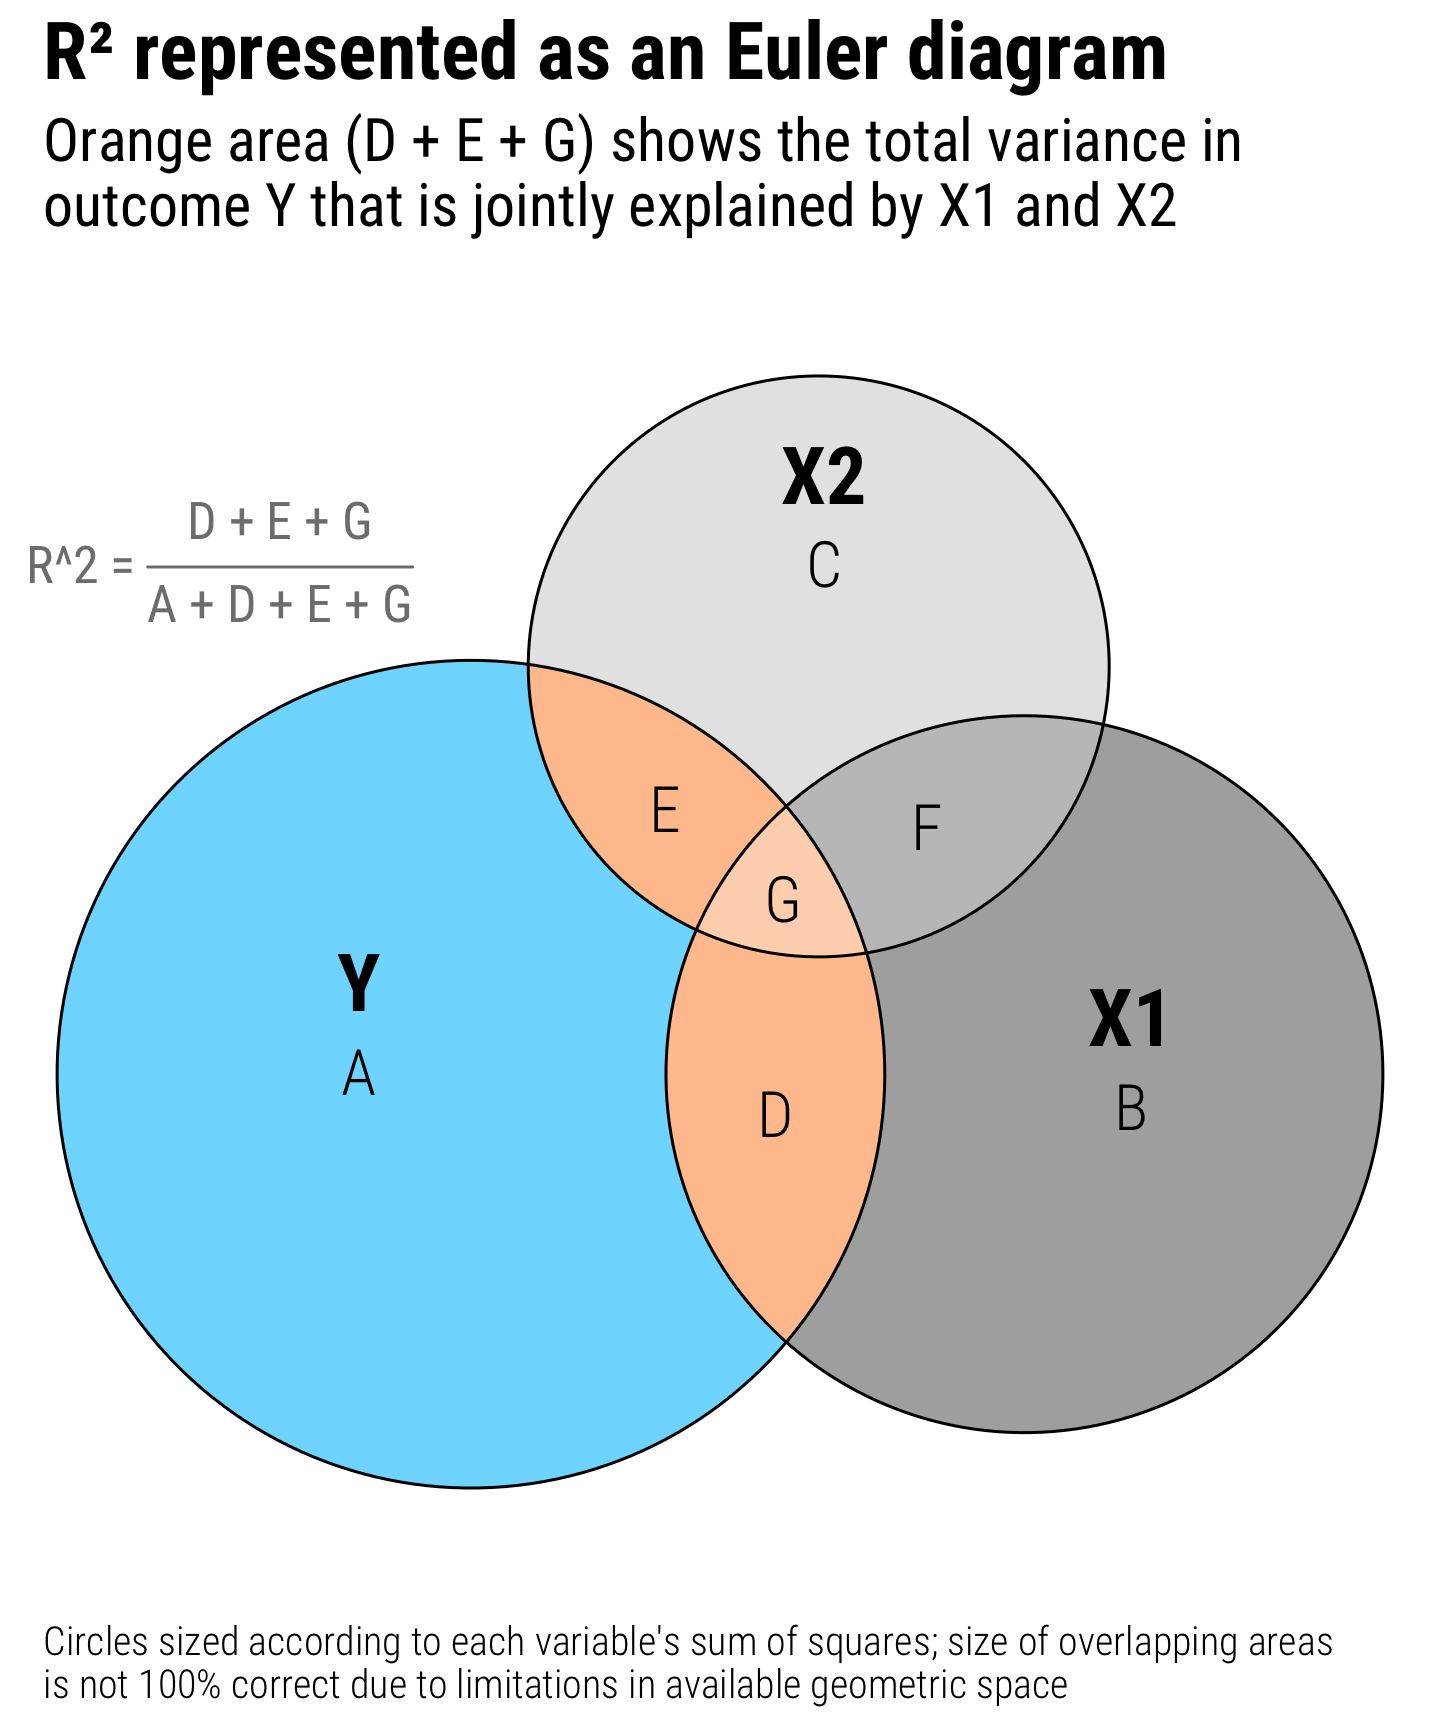 Exploring R² and regression variance with Euler/Venn diagrams